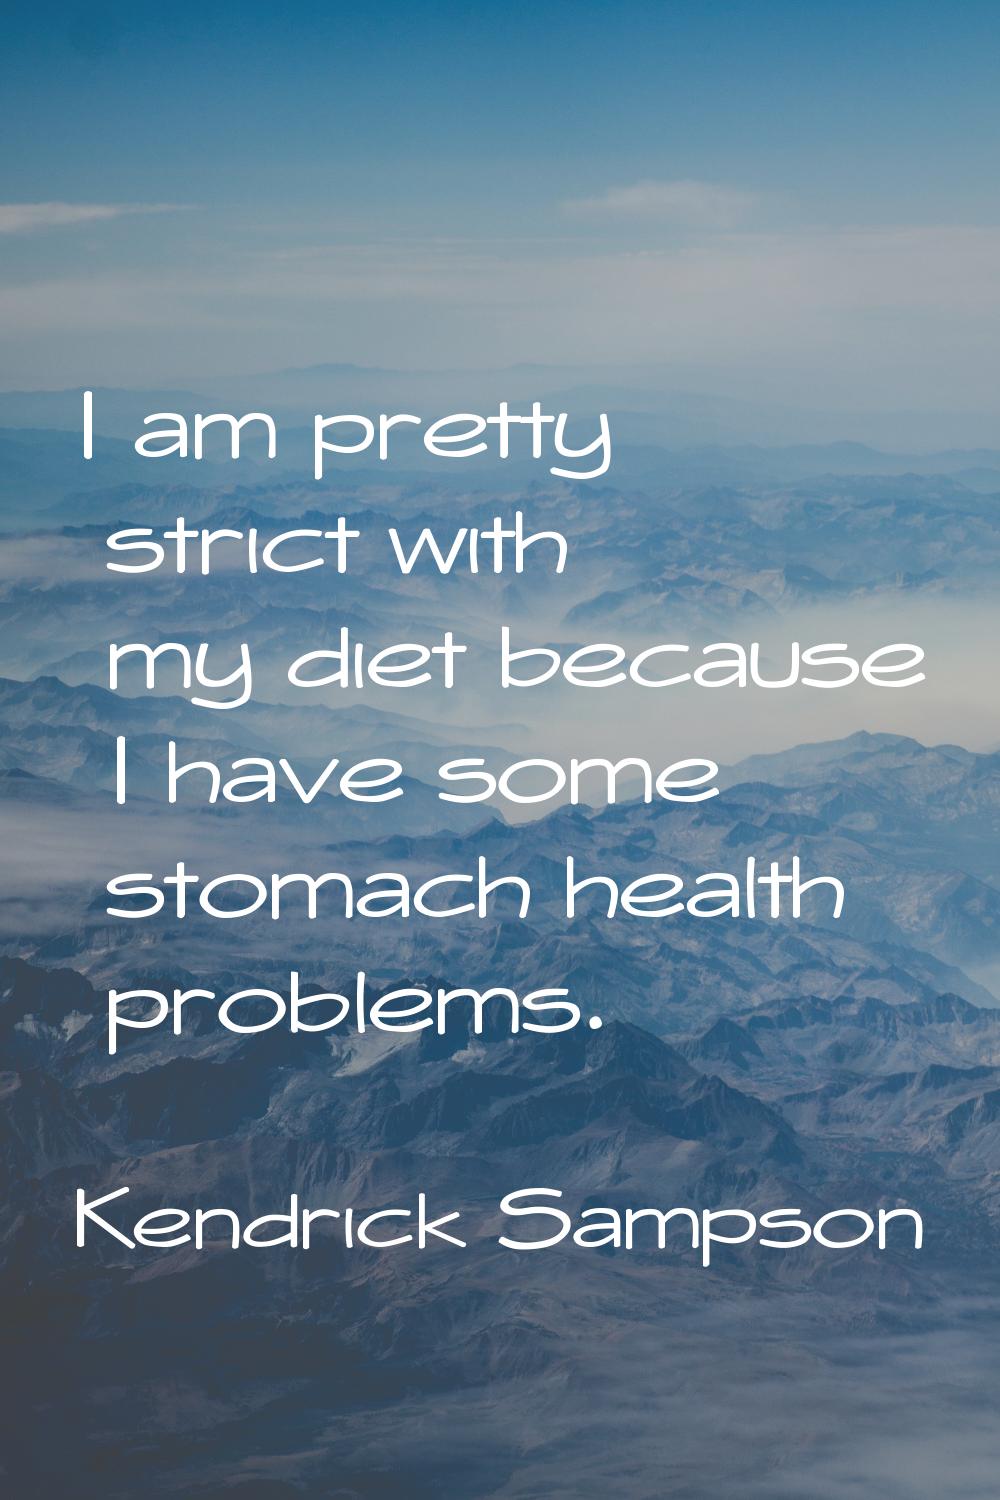 I am pretty strict with my diet because I have some stomach health problems.